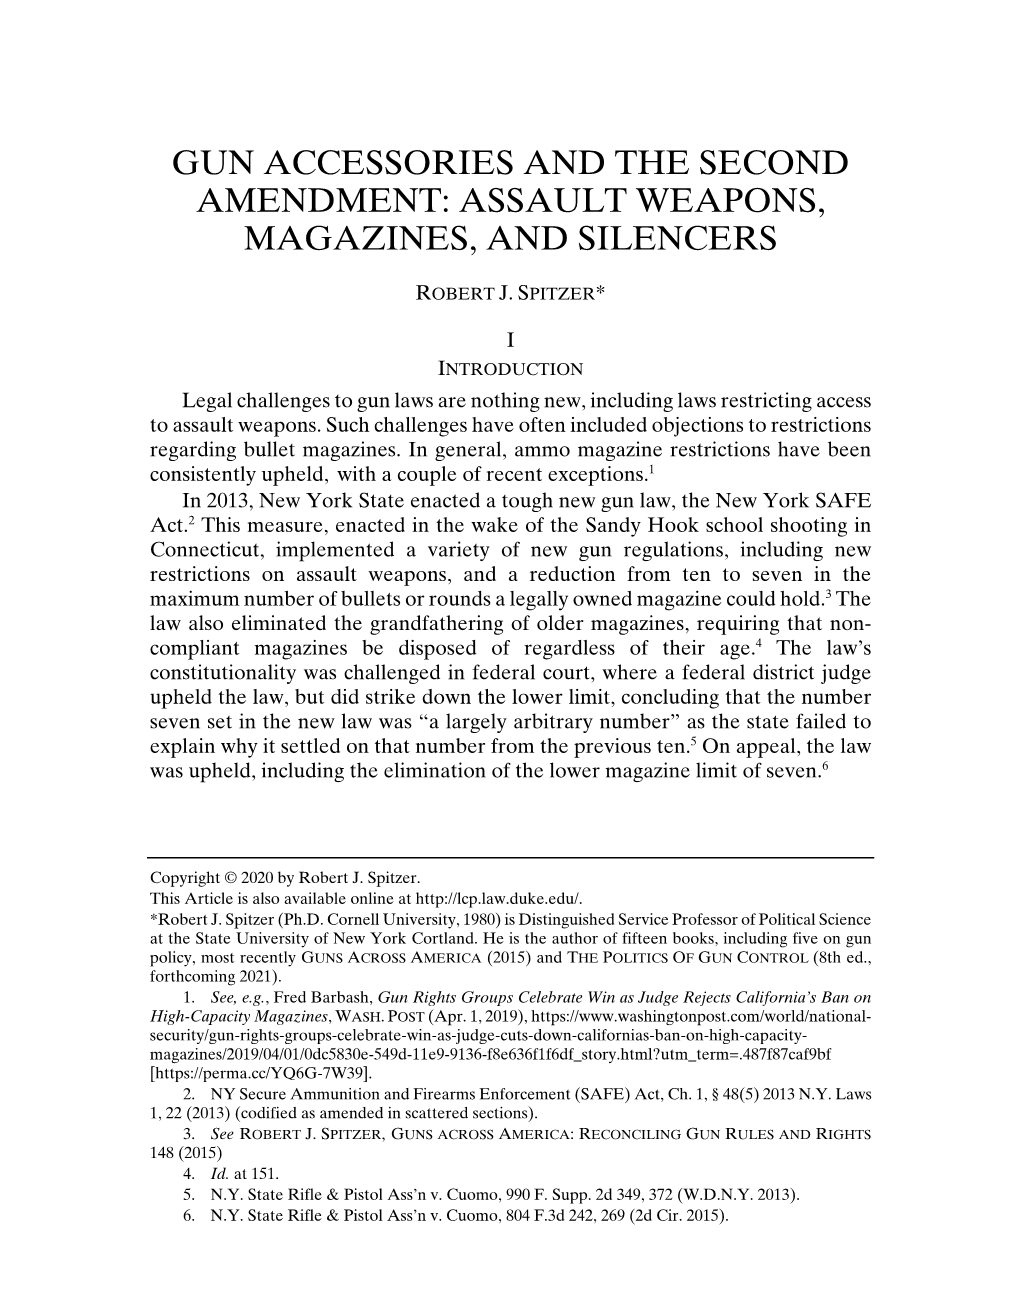 Gun Accessories and the Second Amendment: Assault Weapons, Magazines, and Silencers